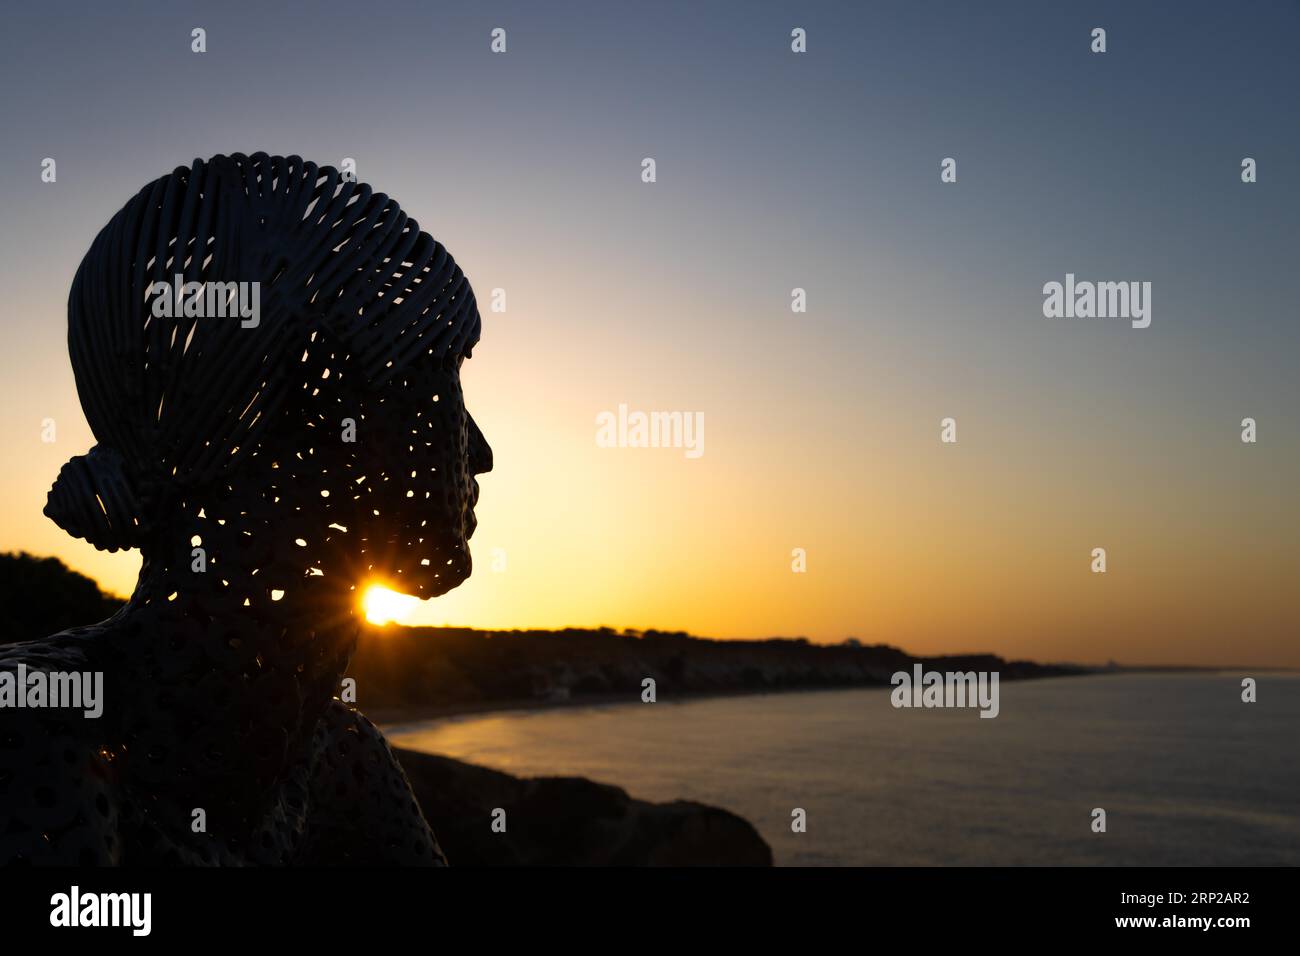 A metal sculpture by artist Carlos de Oliveira Correia looks out over the Atlantic Ocean at sunrise on the viewing platform at Olhos des Augua beach Stock Photo